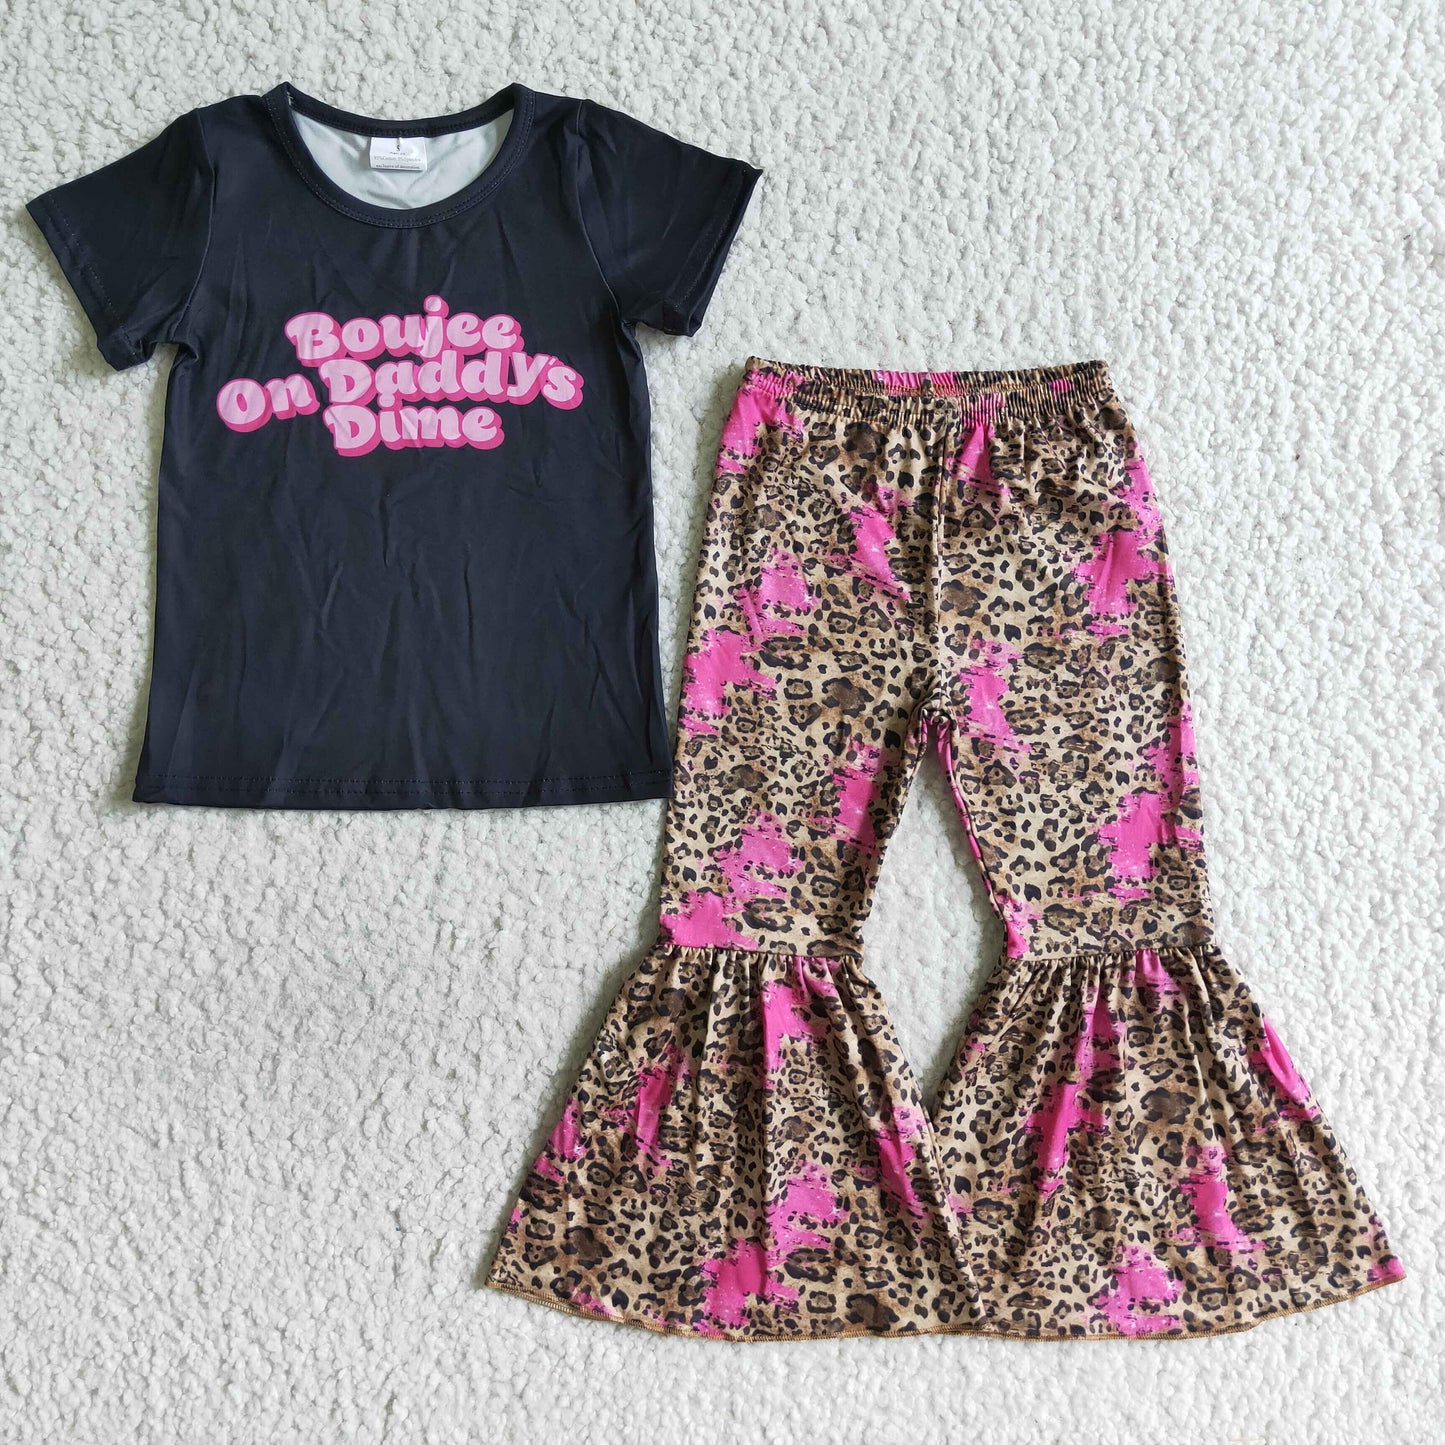 Daddy's dime black shirt leopard pants girls outfits